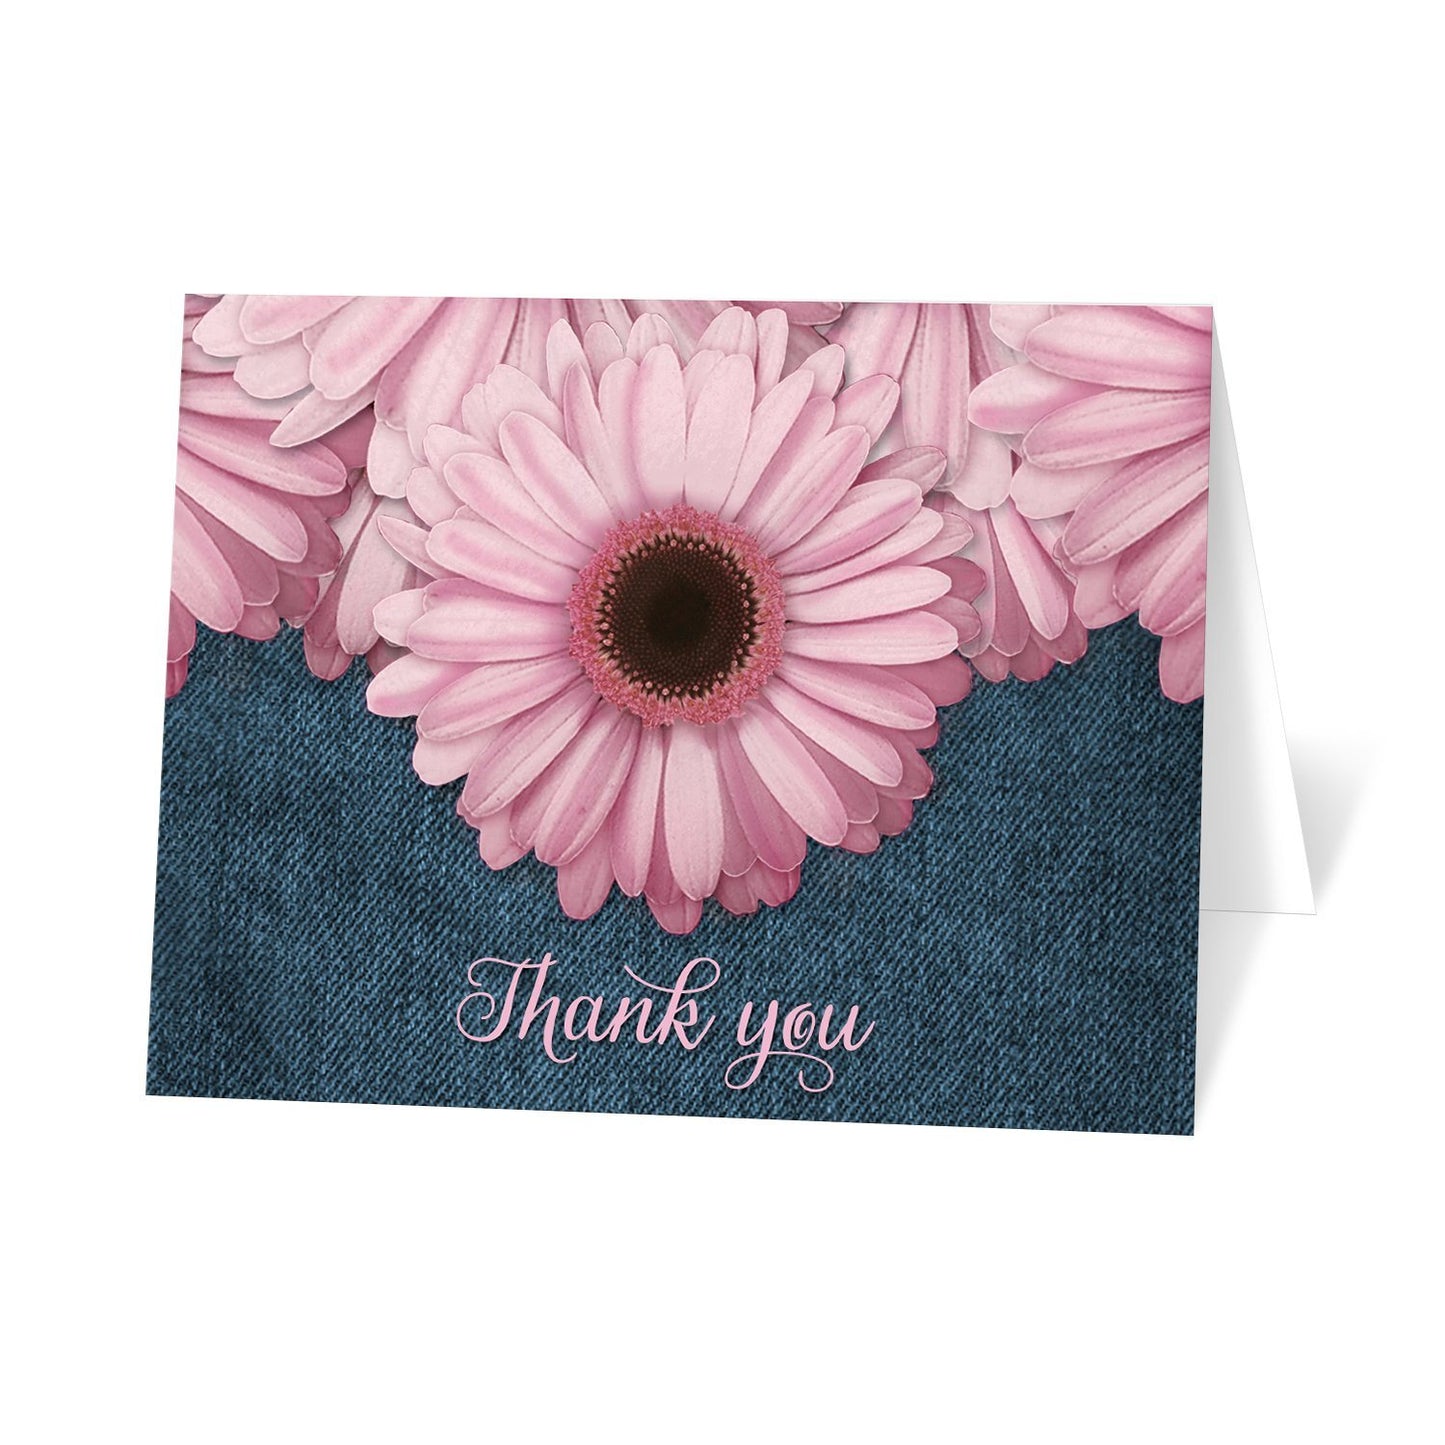 Rustic Pink Daisy Denim Thank You Cards at Artistically Invited